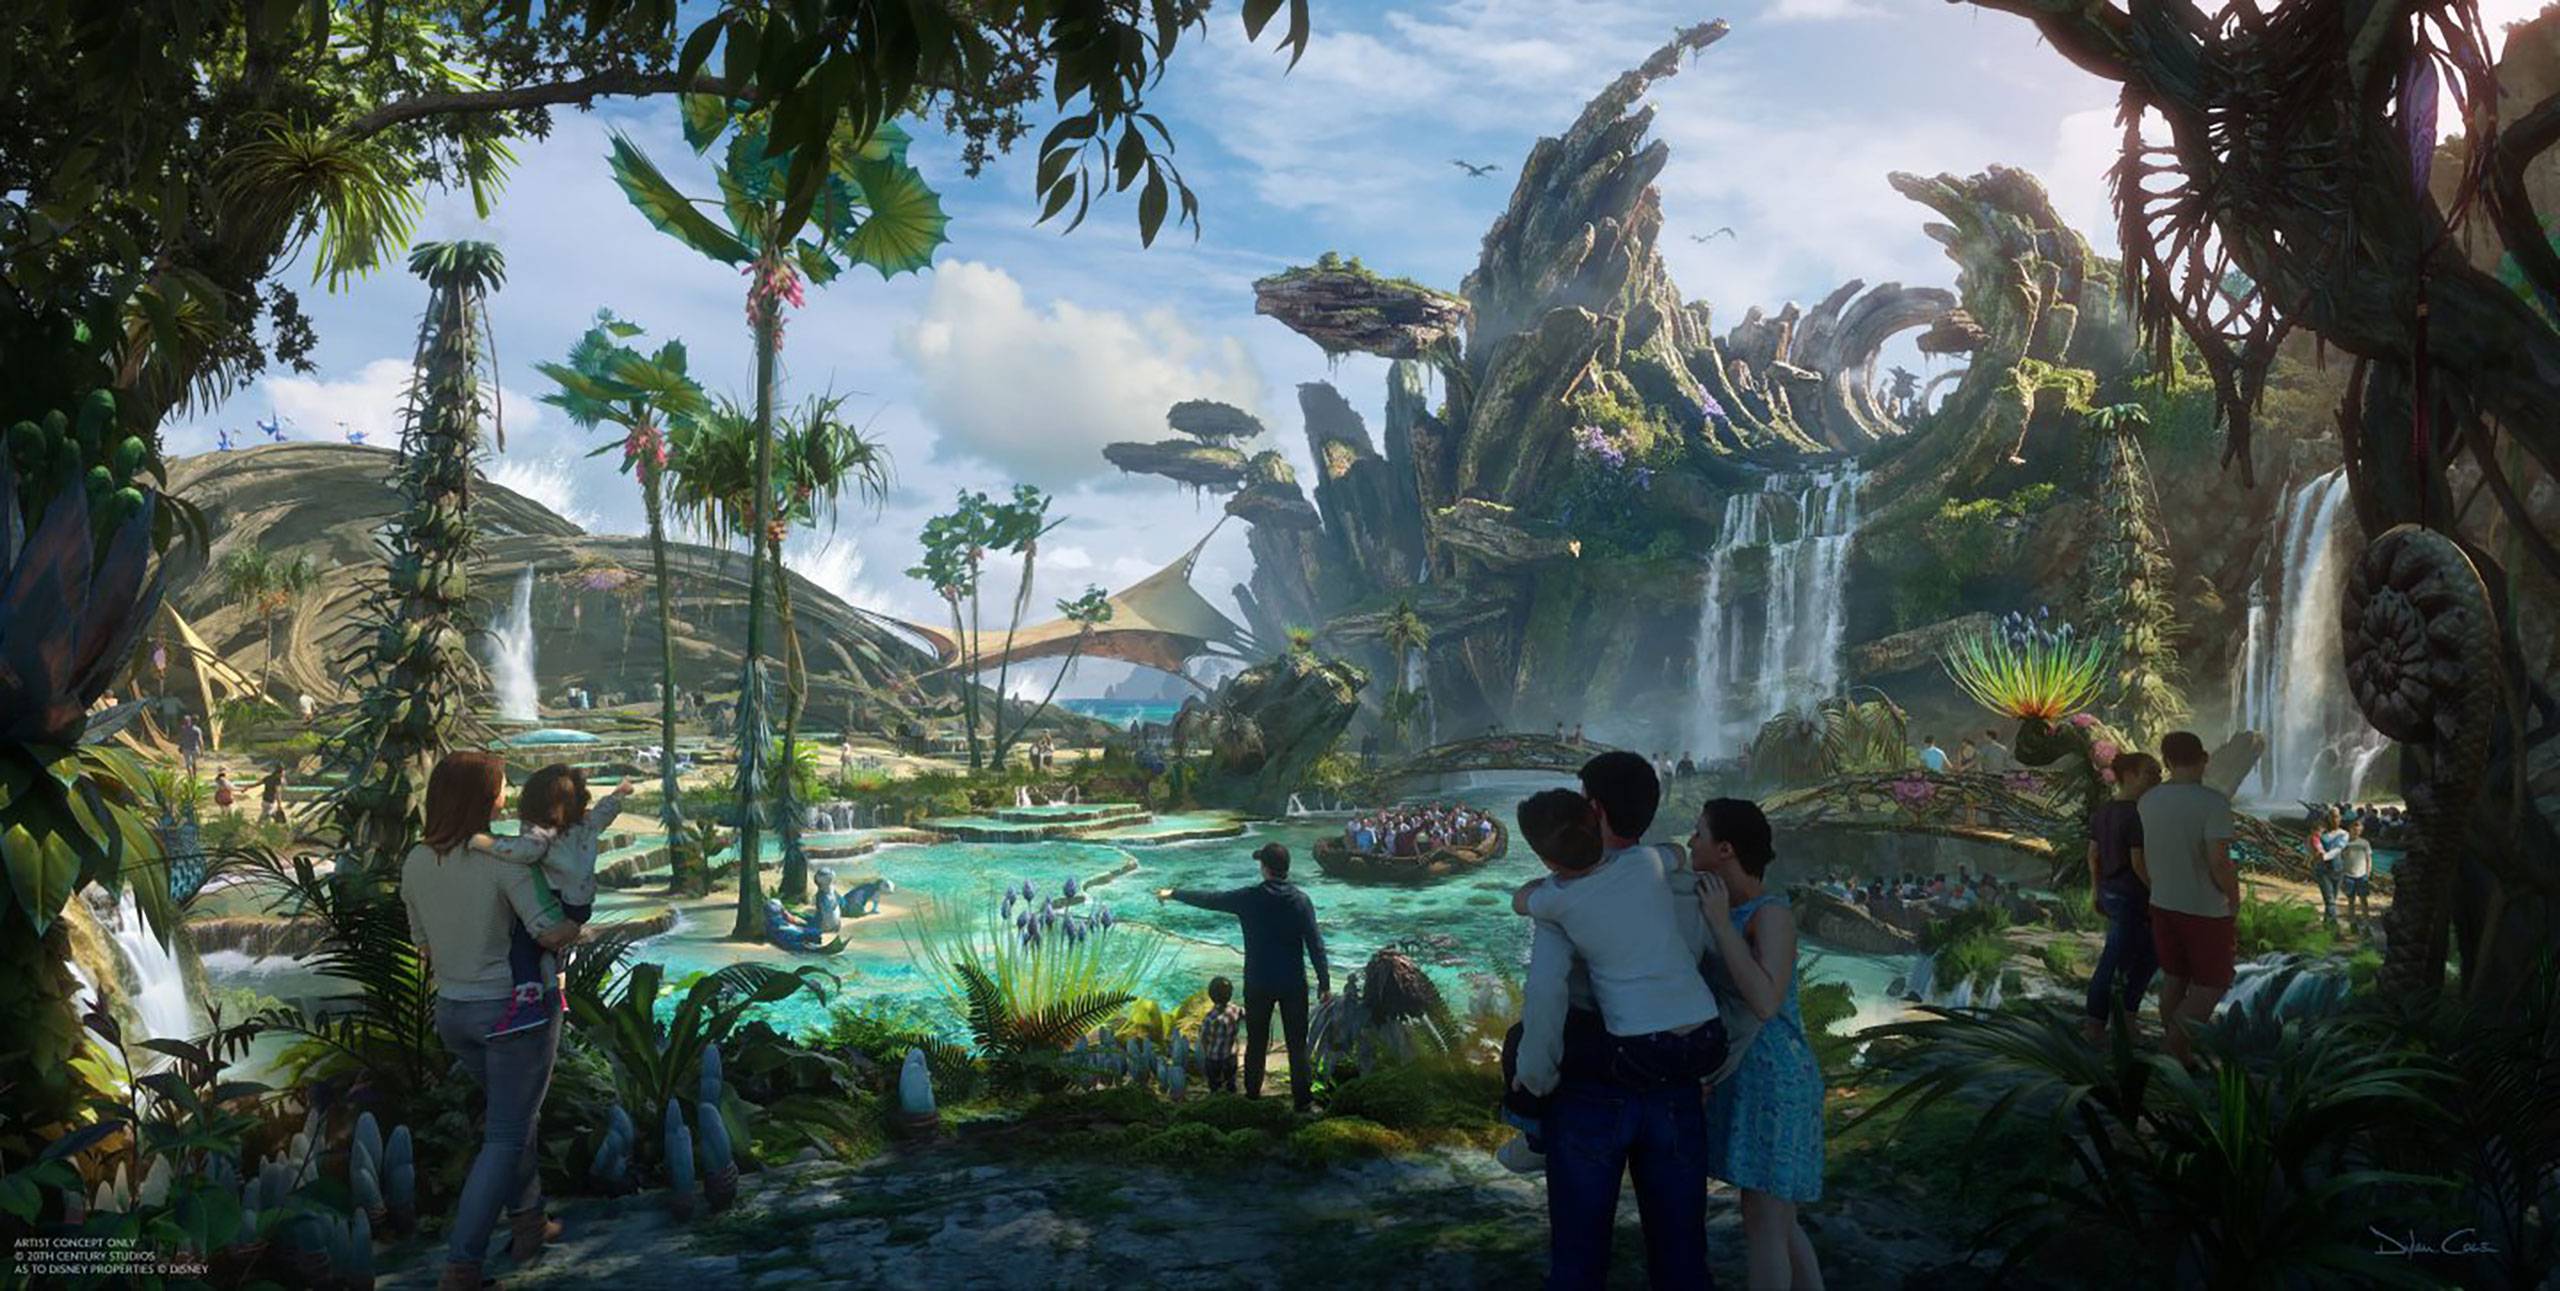 Disney shares first look at possible Avatar experience coming to Disneyland